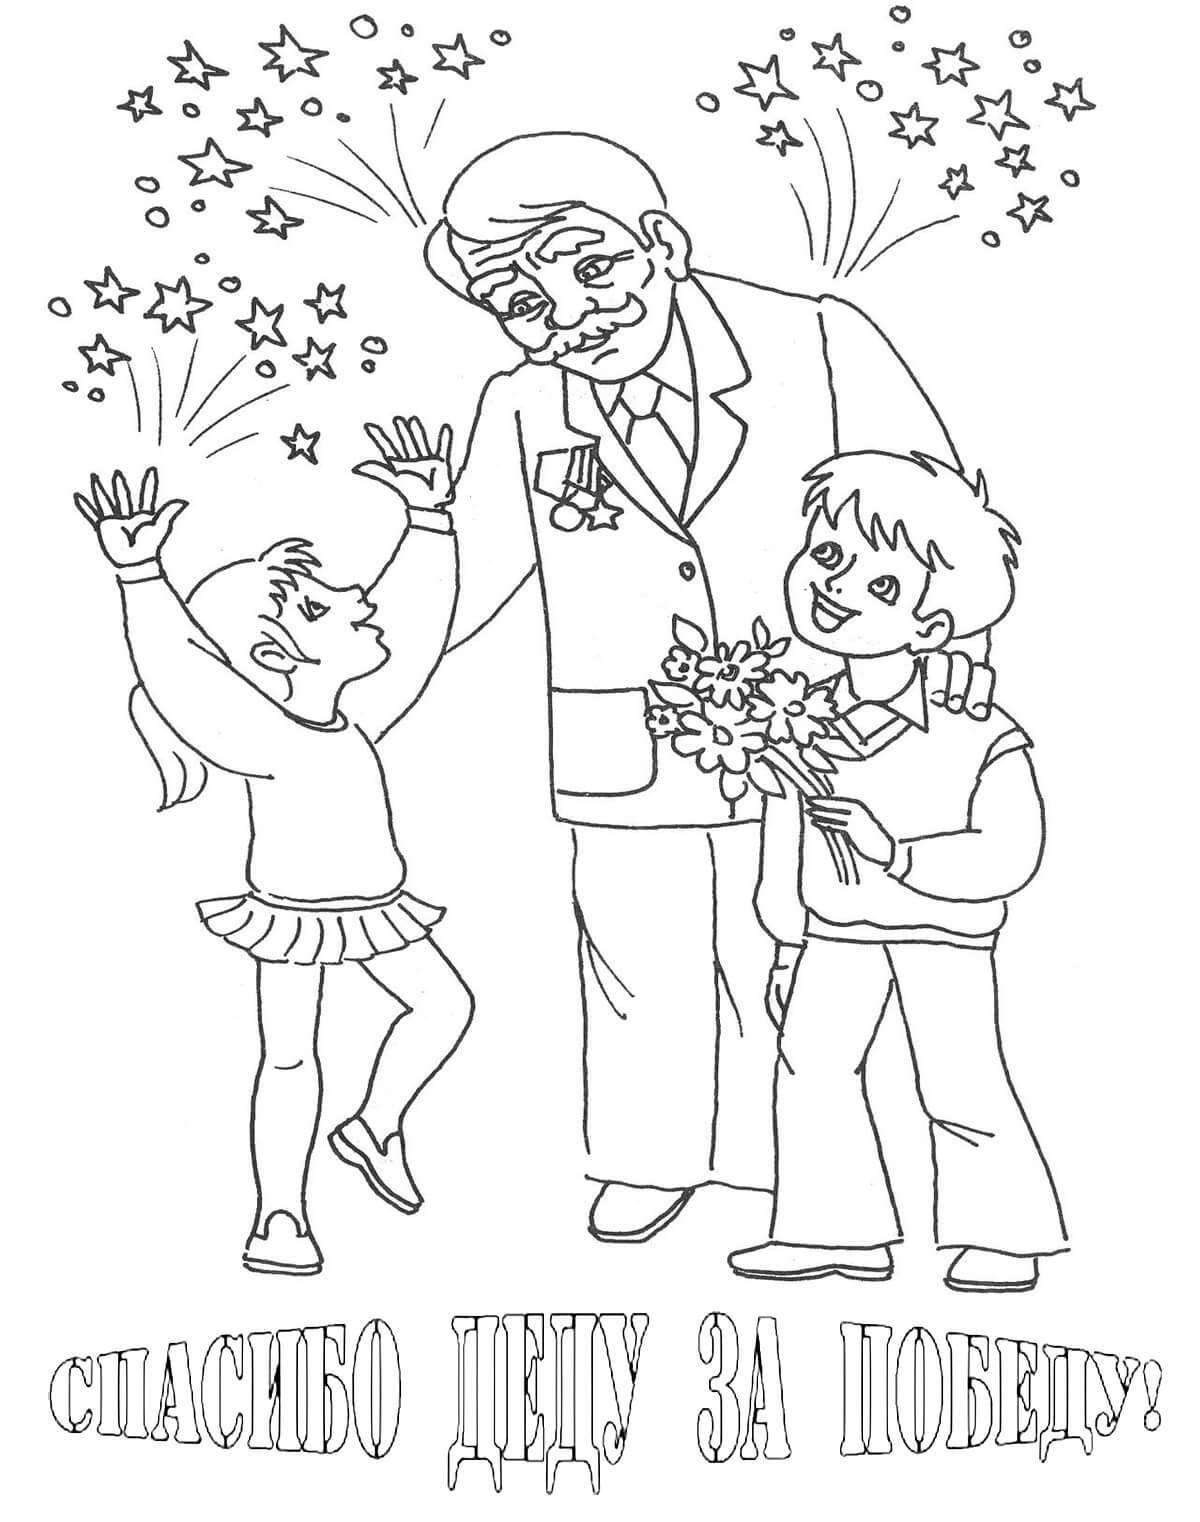 Victory day playful coloring for kids